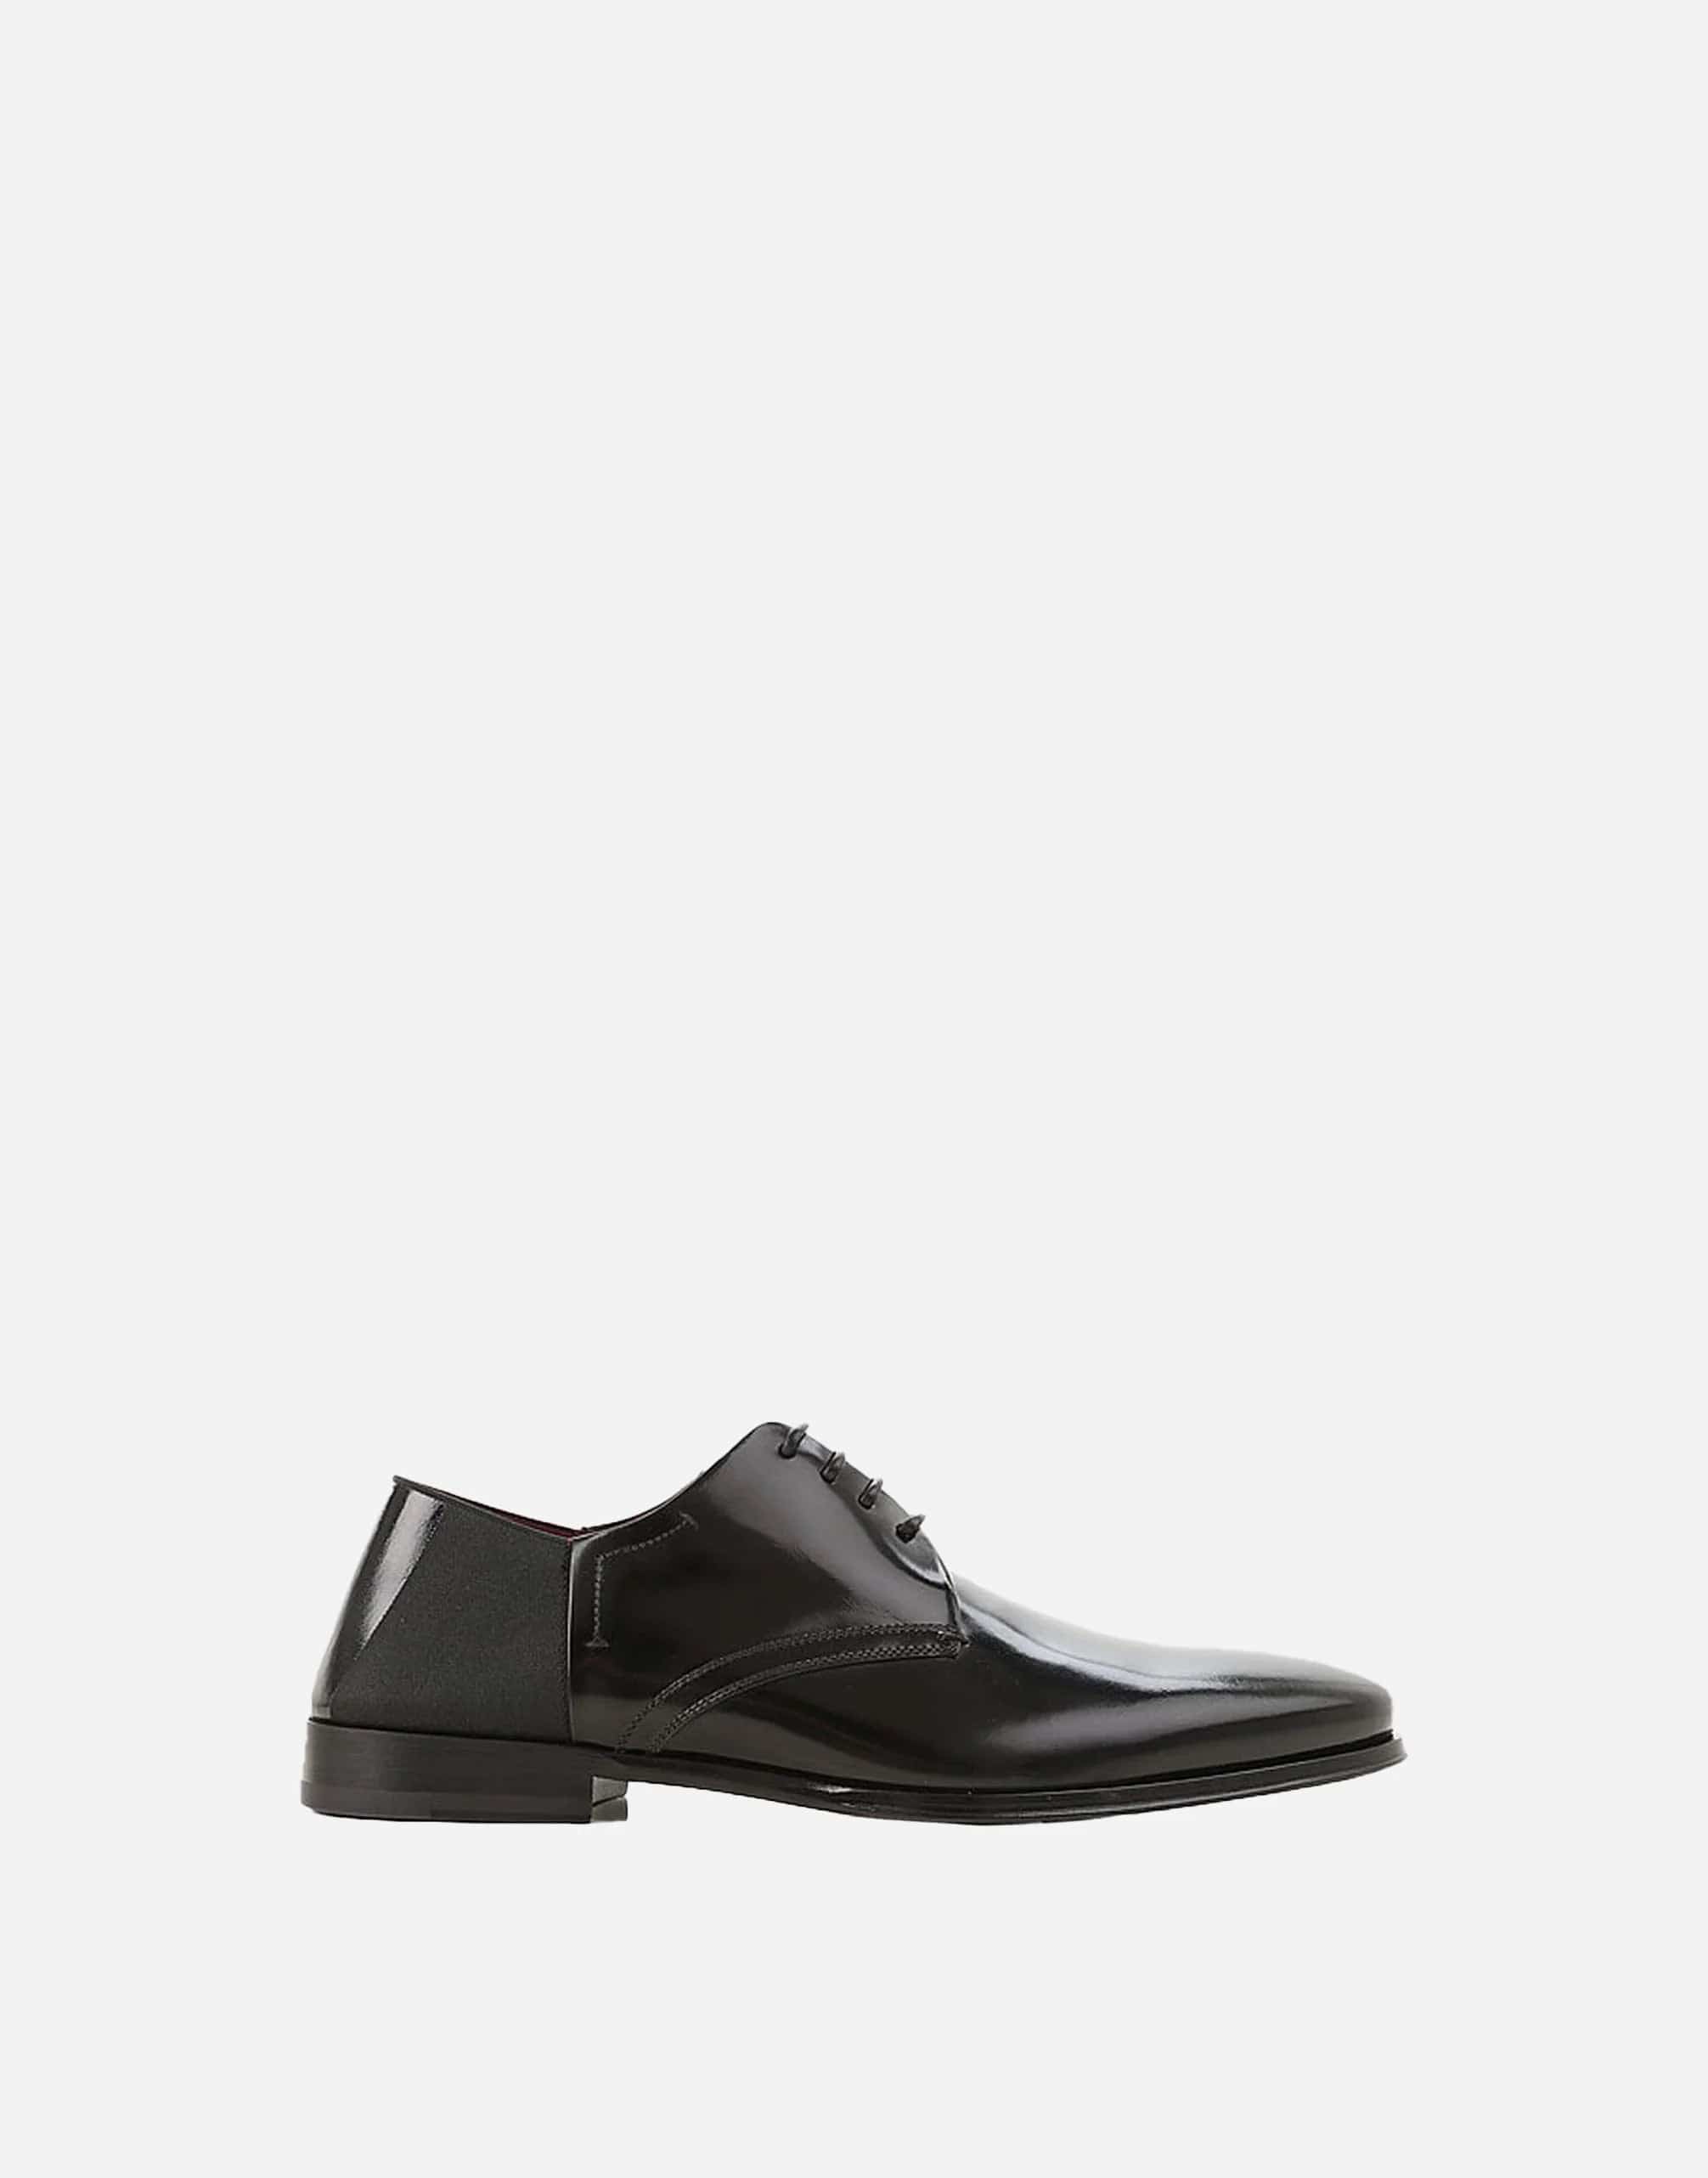 Dolce & Gabbana Stretch Patent Derby Shoes